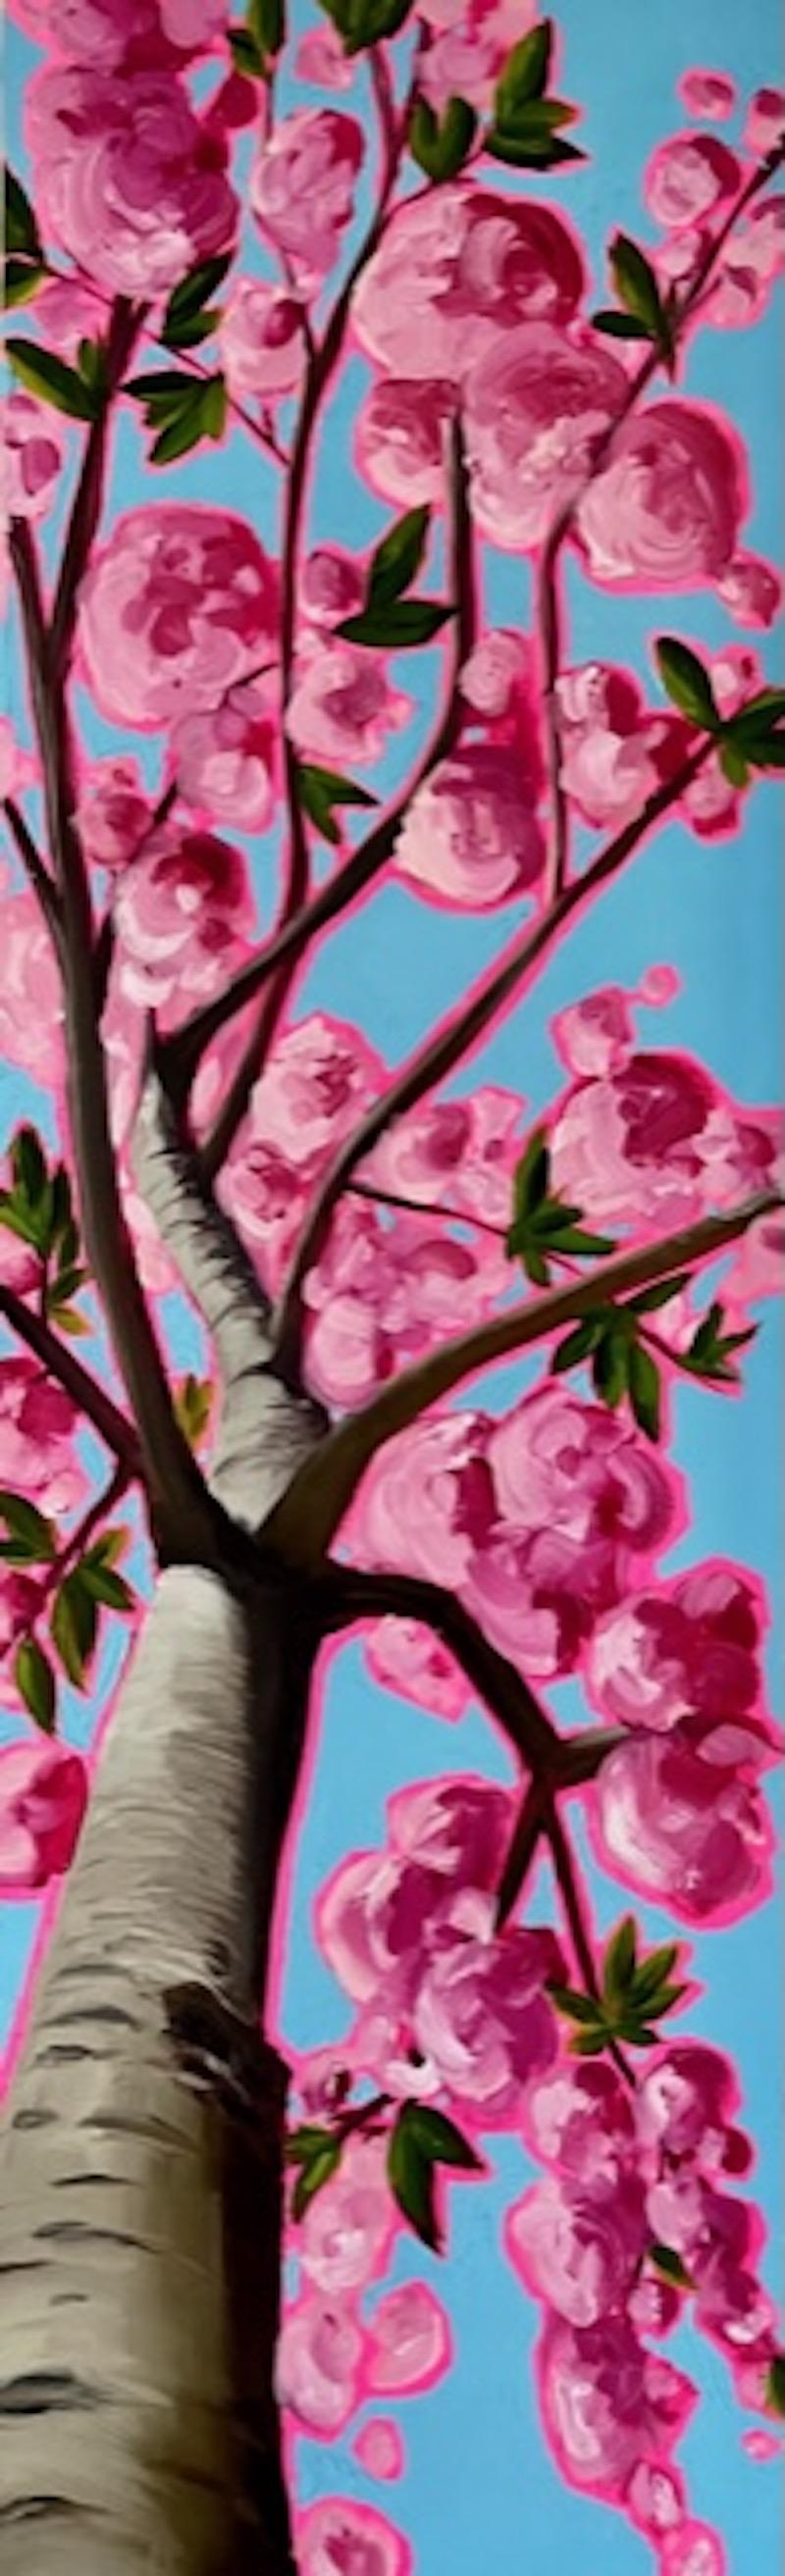 Emily Finch Landscape Painting - Looking up through tall pink blossom to soothe my tired eyes 